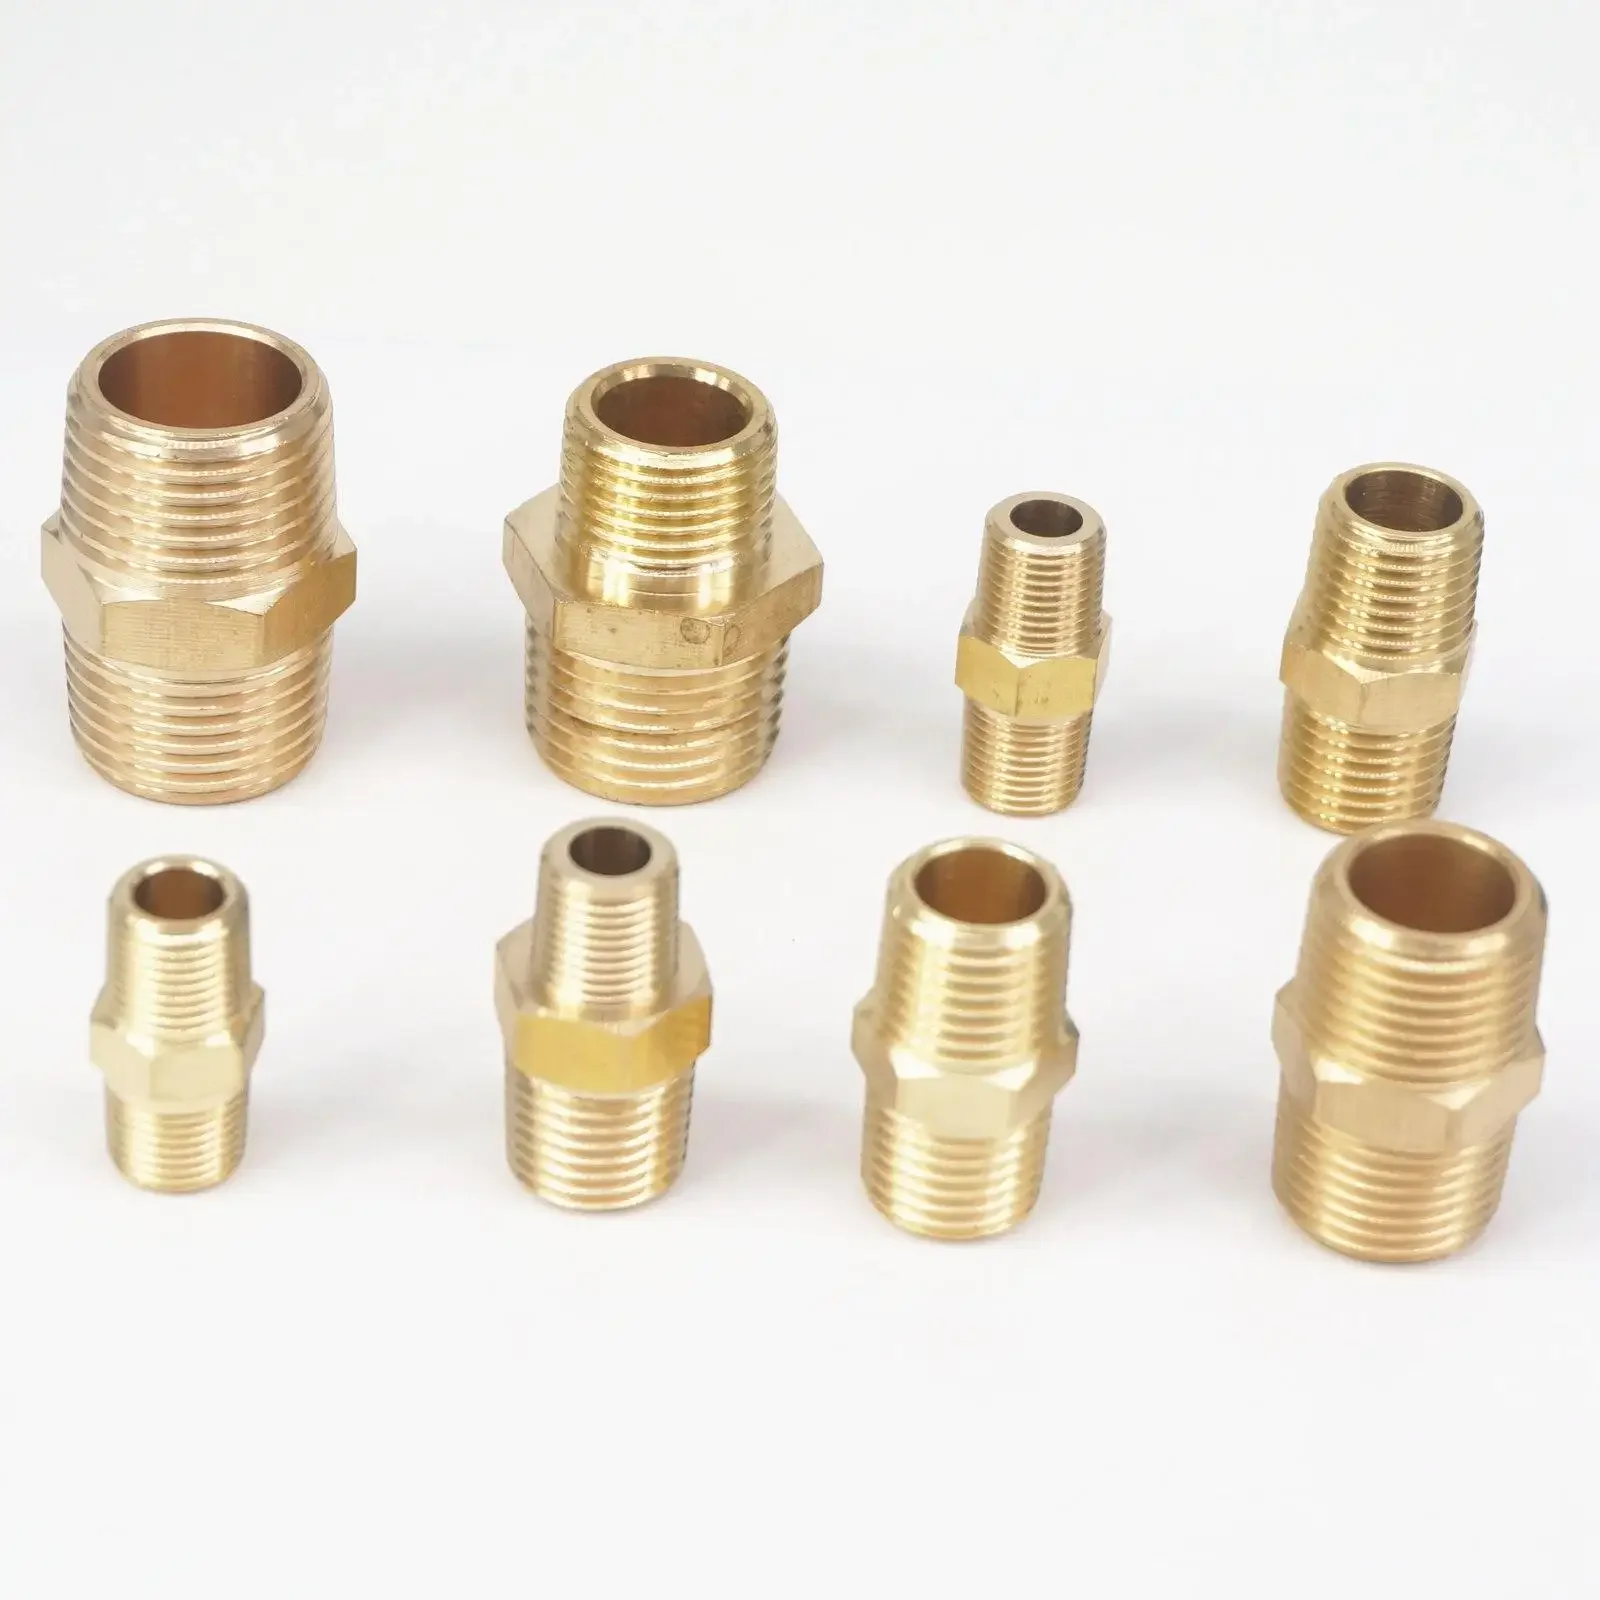 

1/8" 1/4" 3/8" 1/2" NPT Male Hex Nipple Reducer Reducing Brass Pipe Fitting Connector Adapter Max Pressure 229 PSI